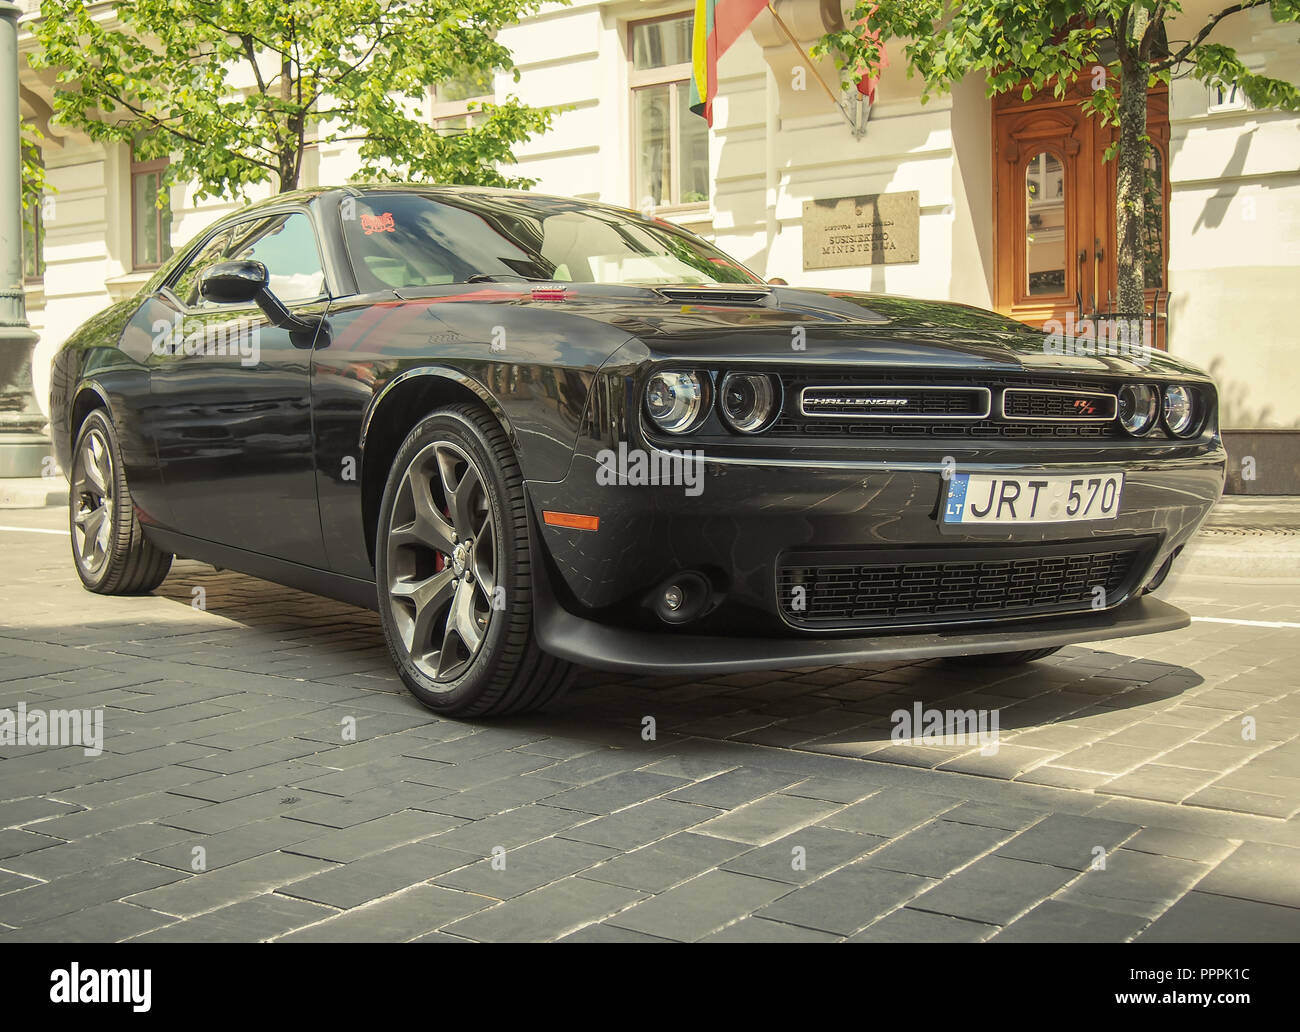 VILNIUS, LITHUANIA-JUNE 10, 2017: 2013 Dodge Challenger R/T at the city streets. Stock Photo